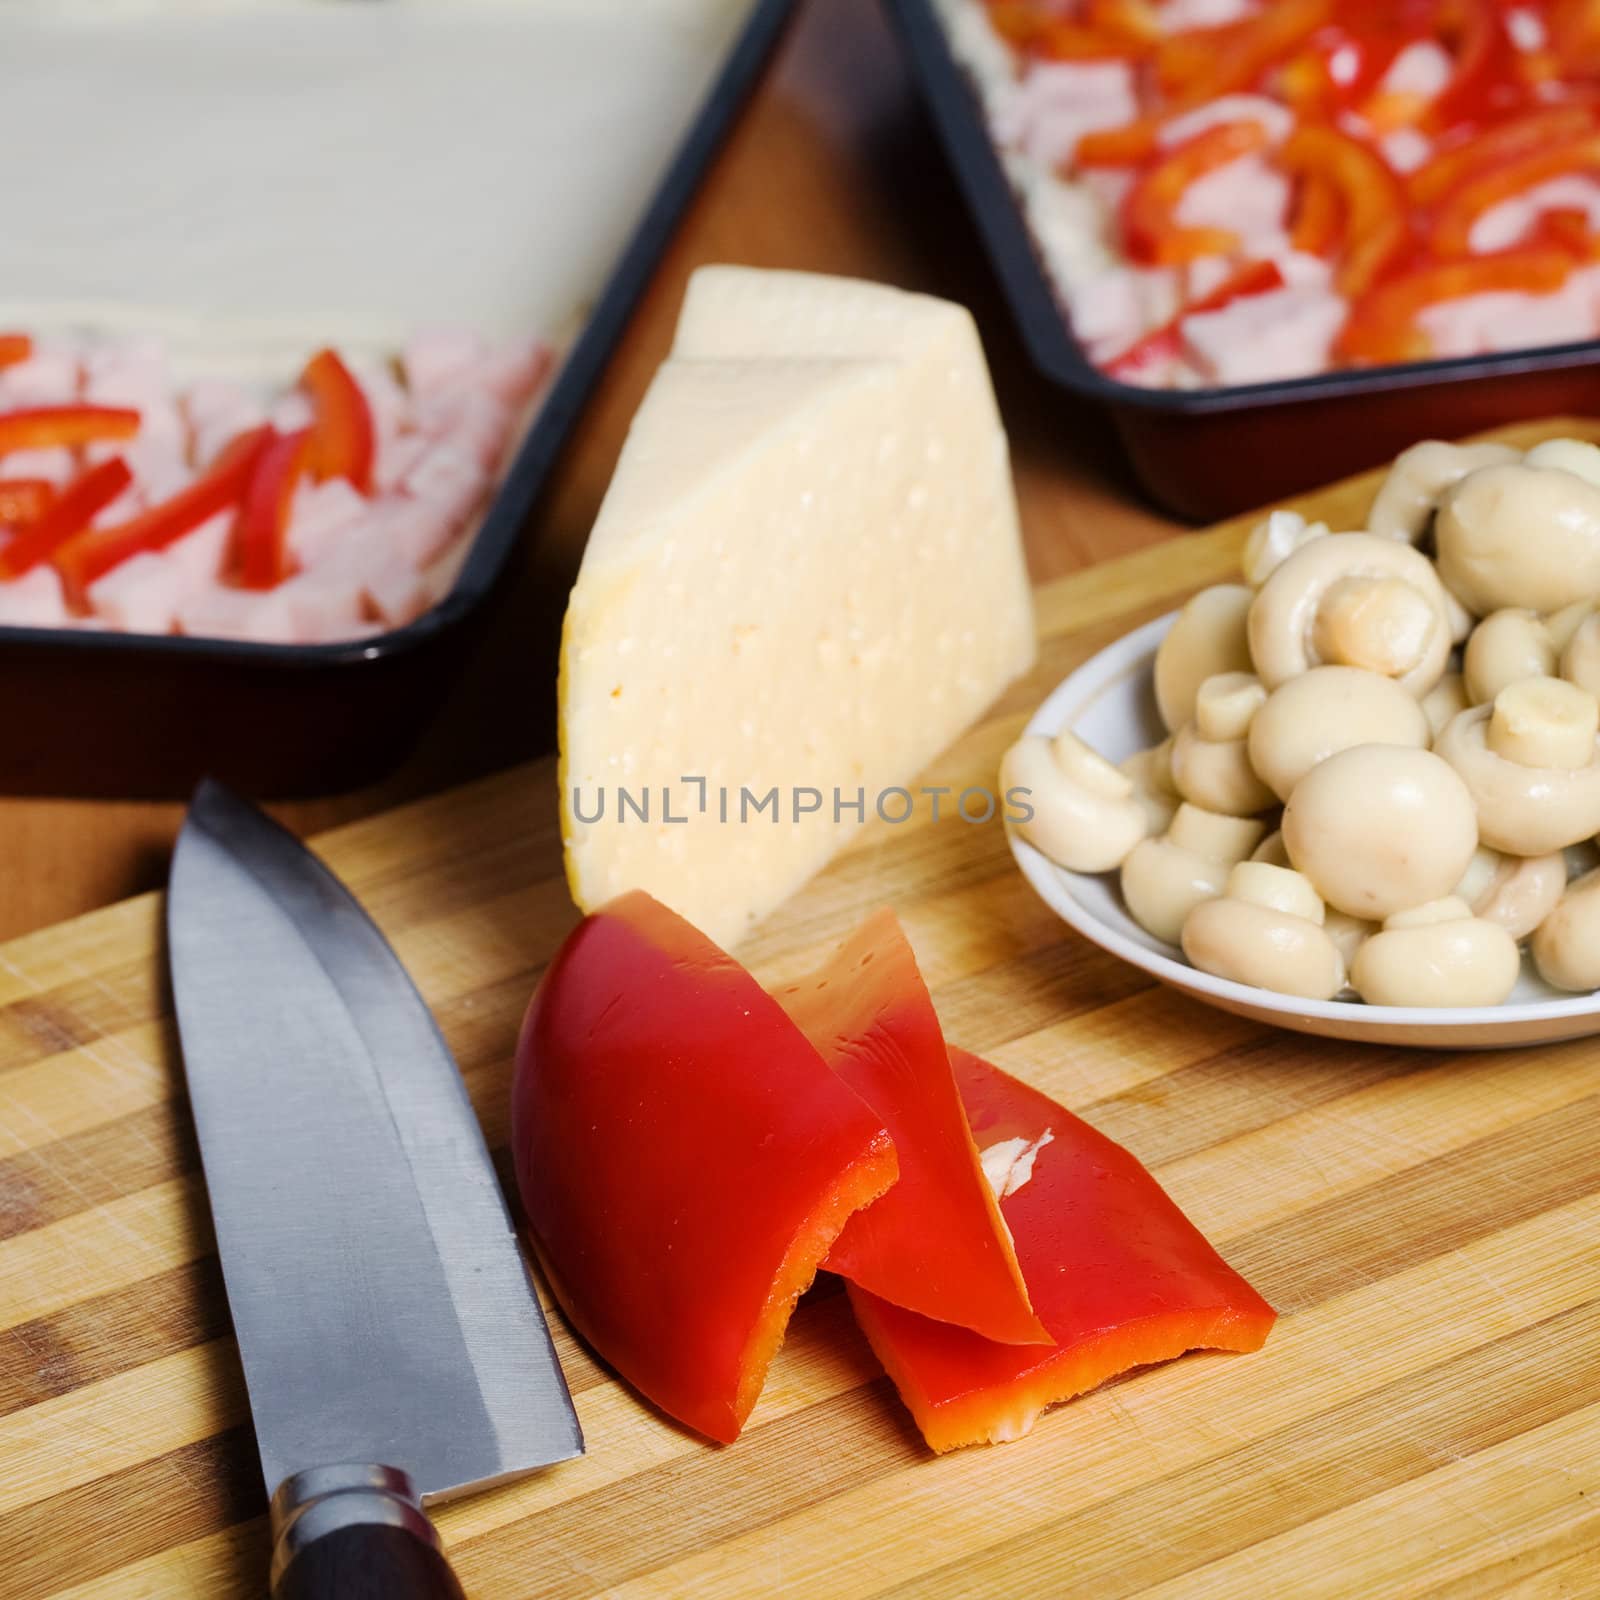 An image of food in the kitchen: mushrooms, paprika, cheese and knife